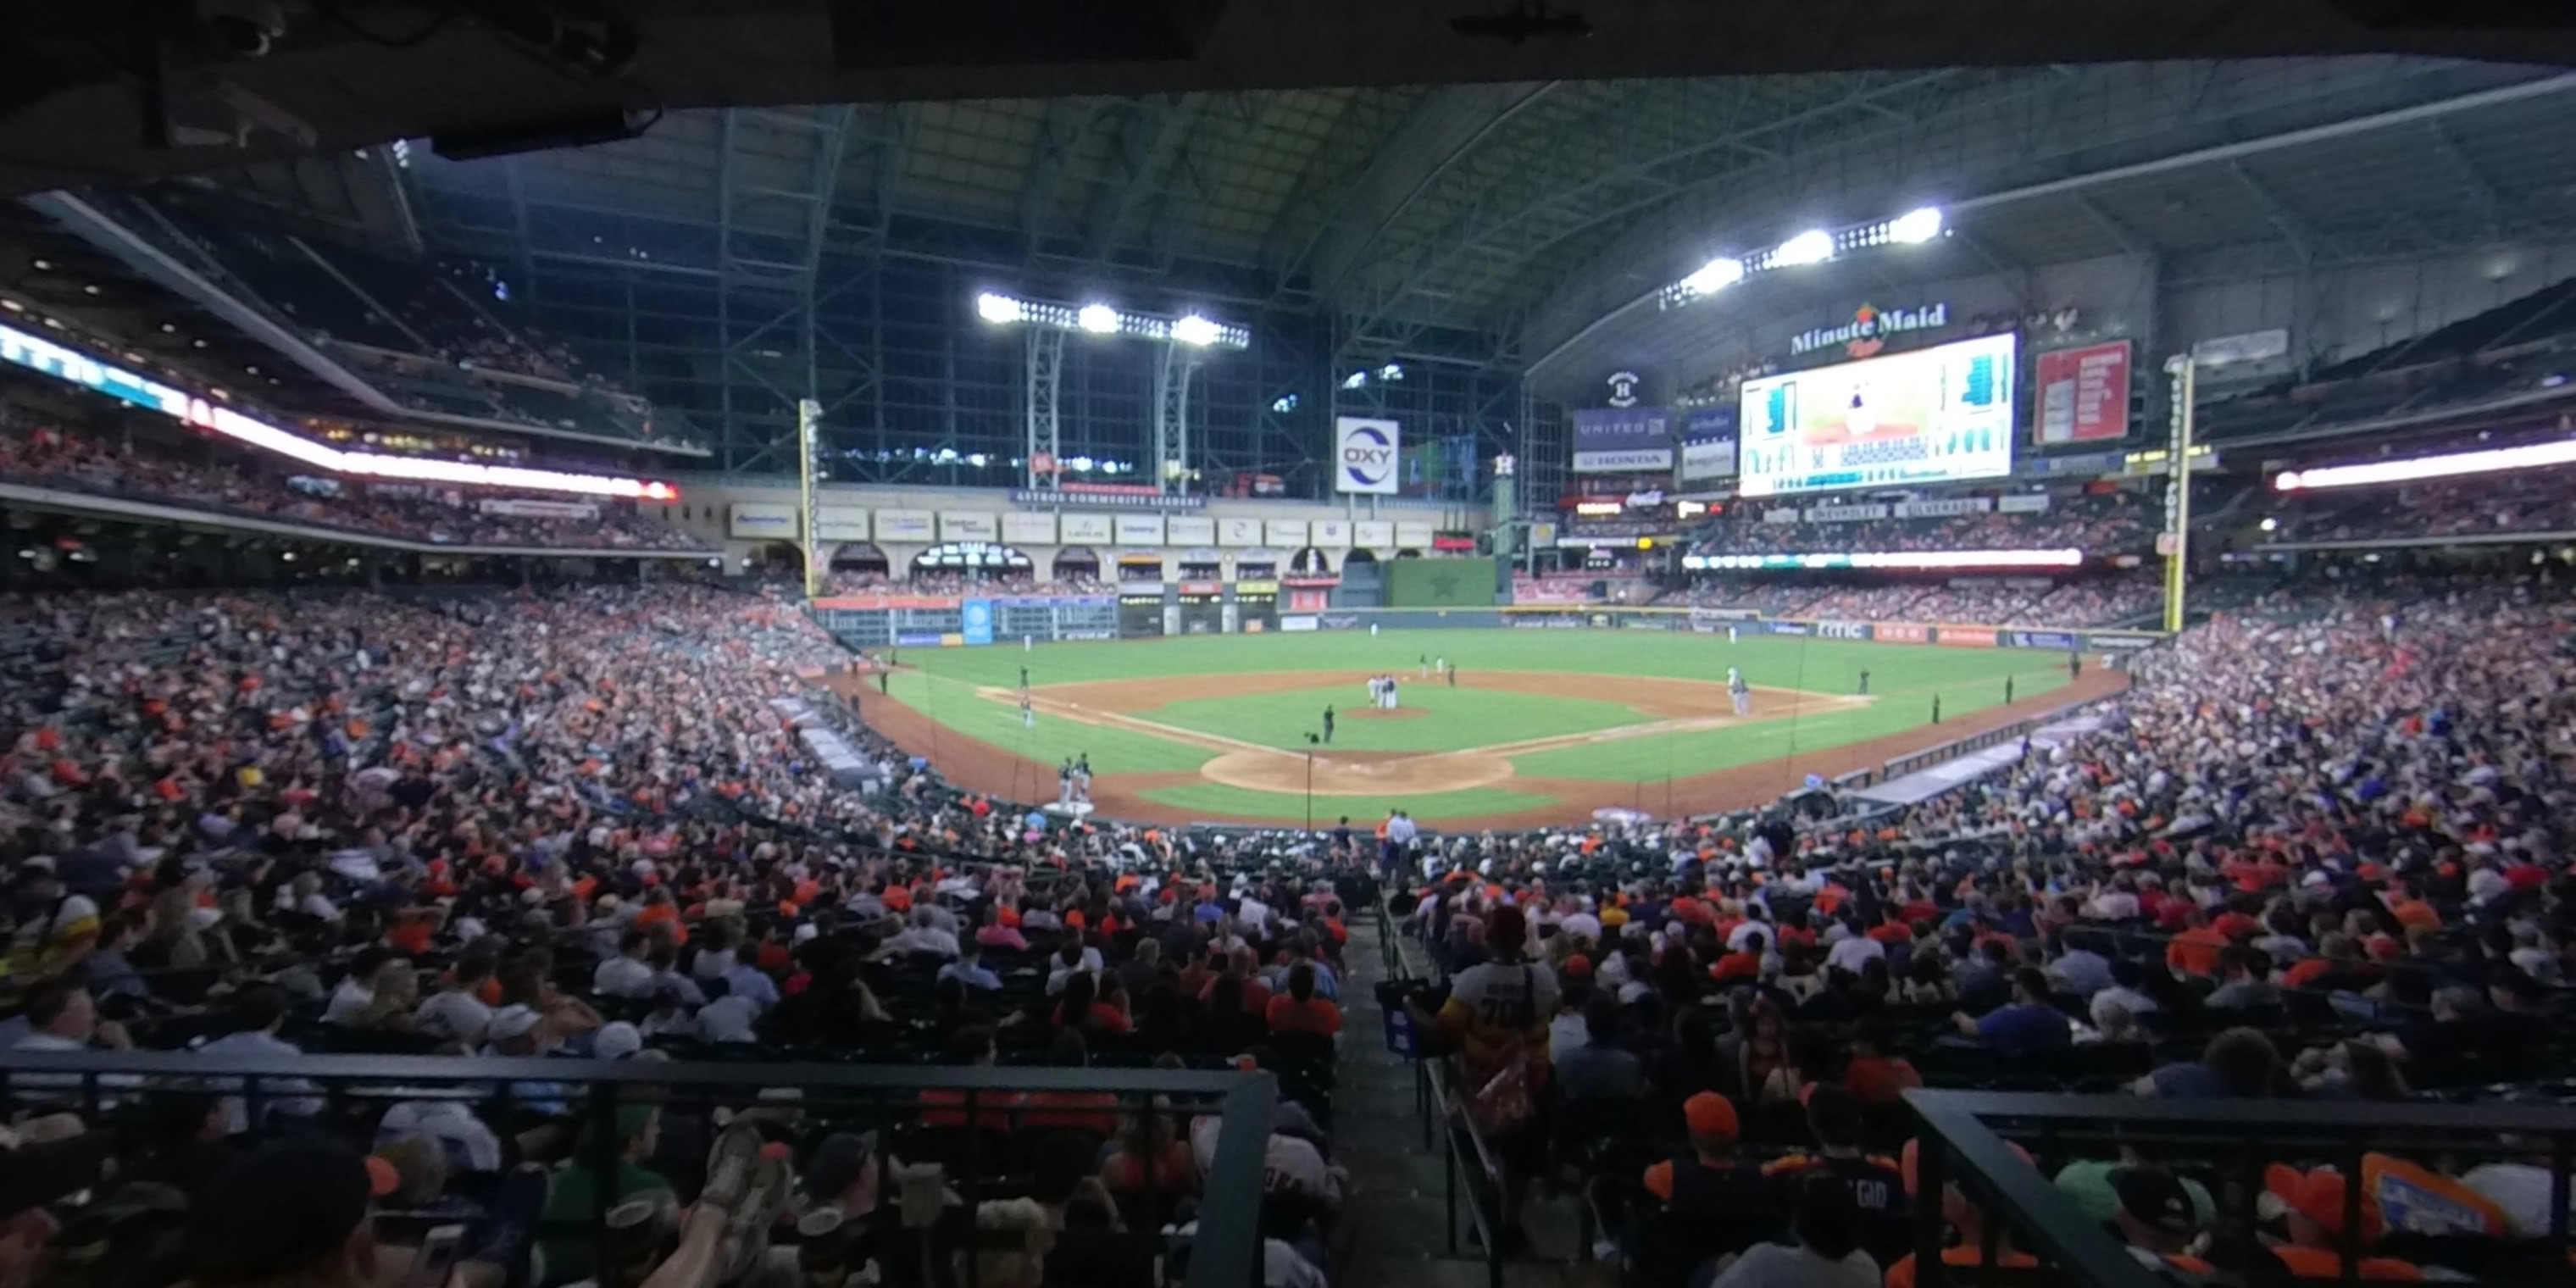 section 120 panoramic seat view  for baseball - minute maid park